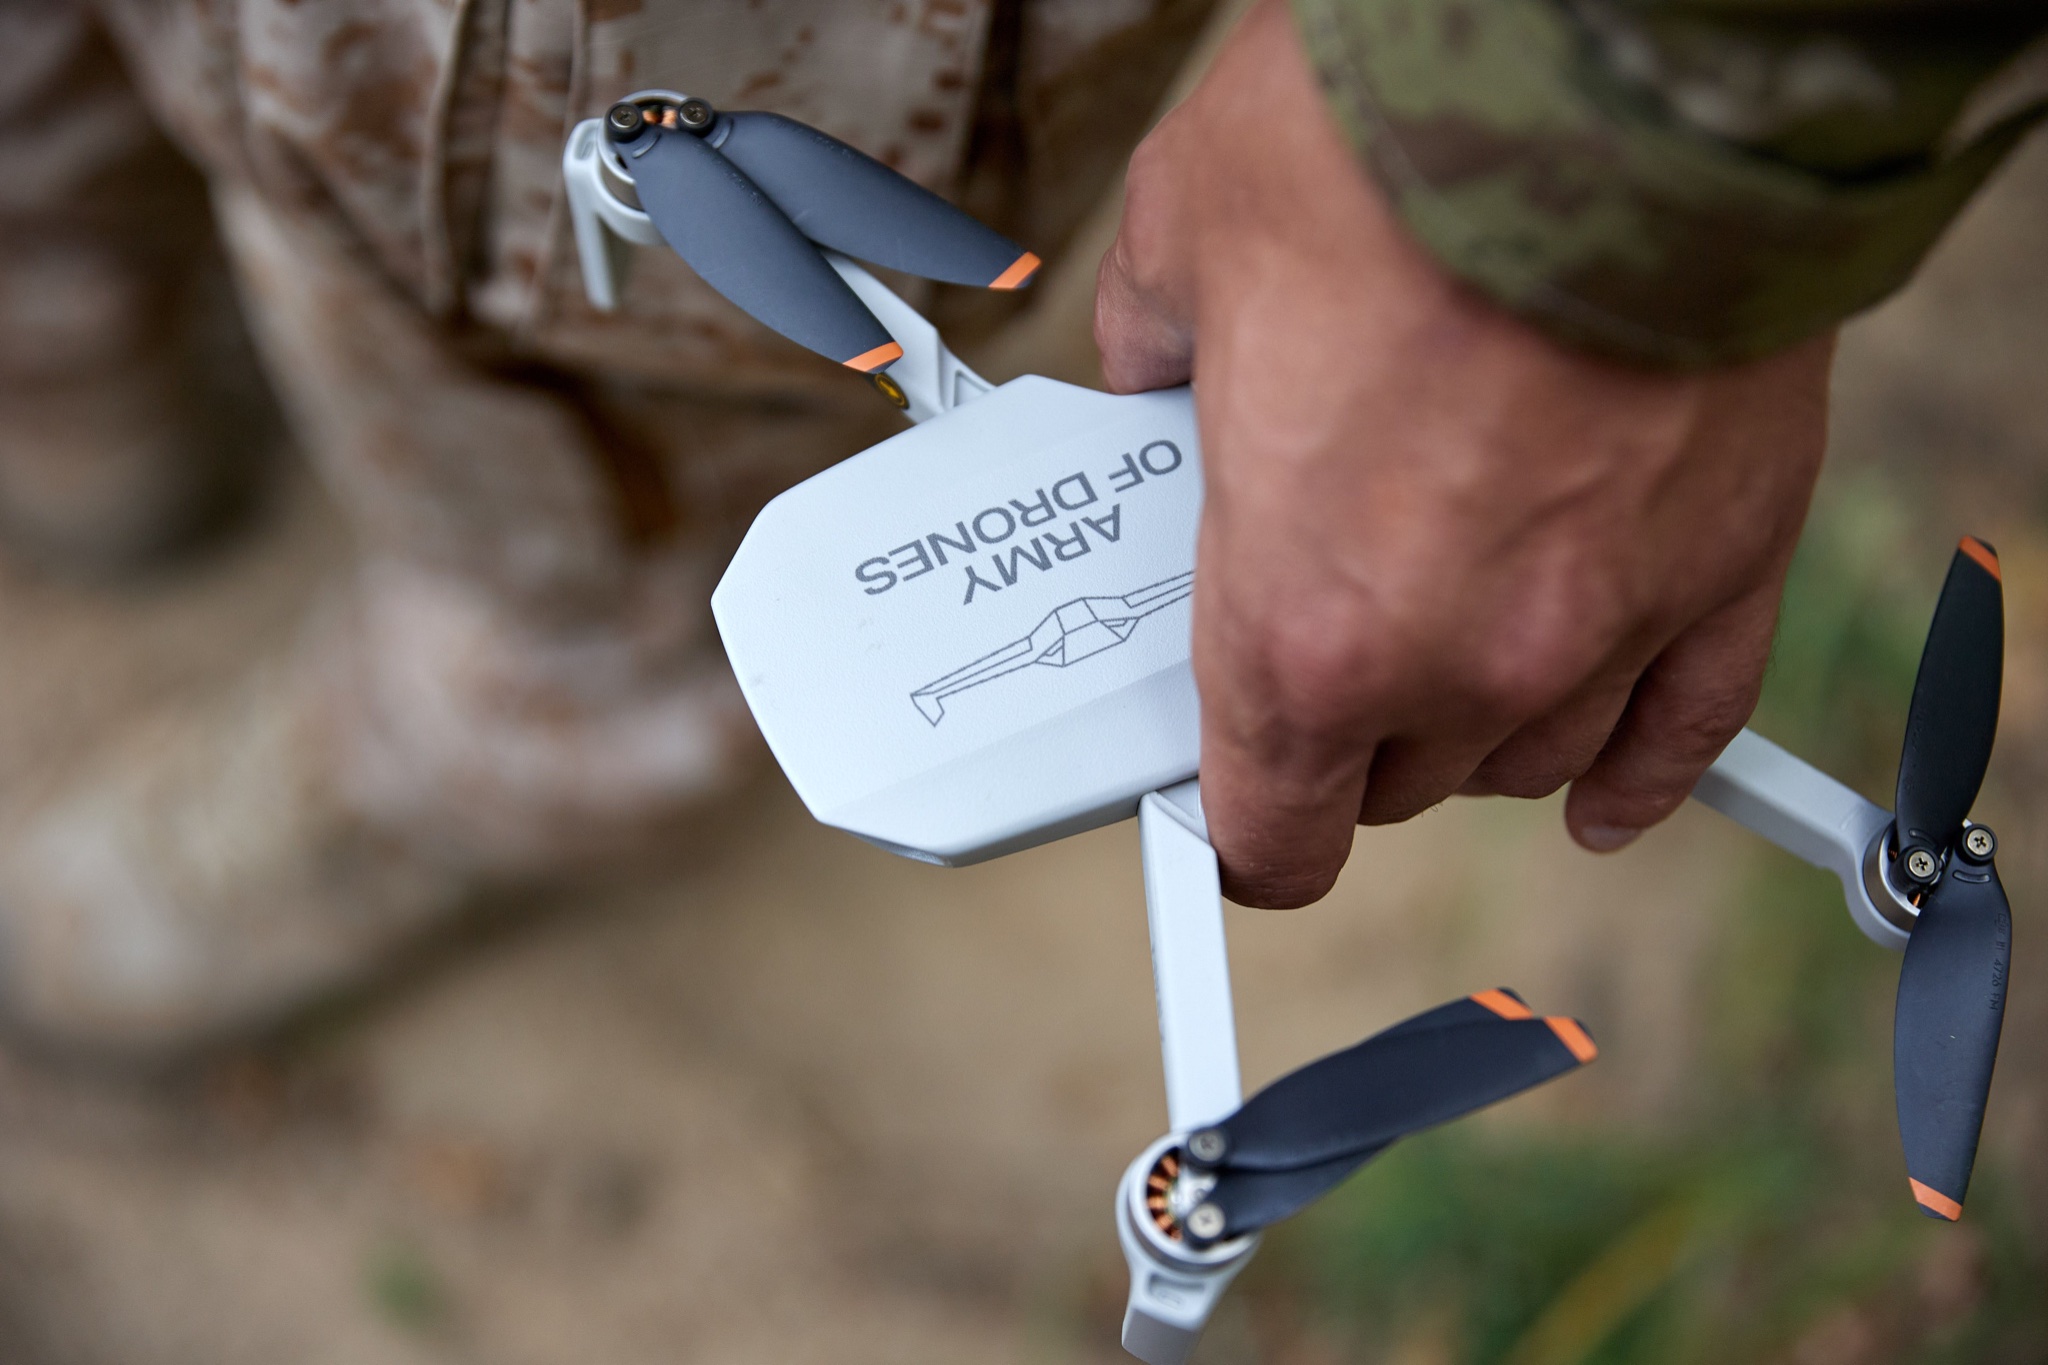 About 400 military personnel have been trained for the Drone Army